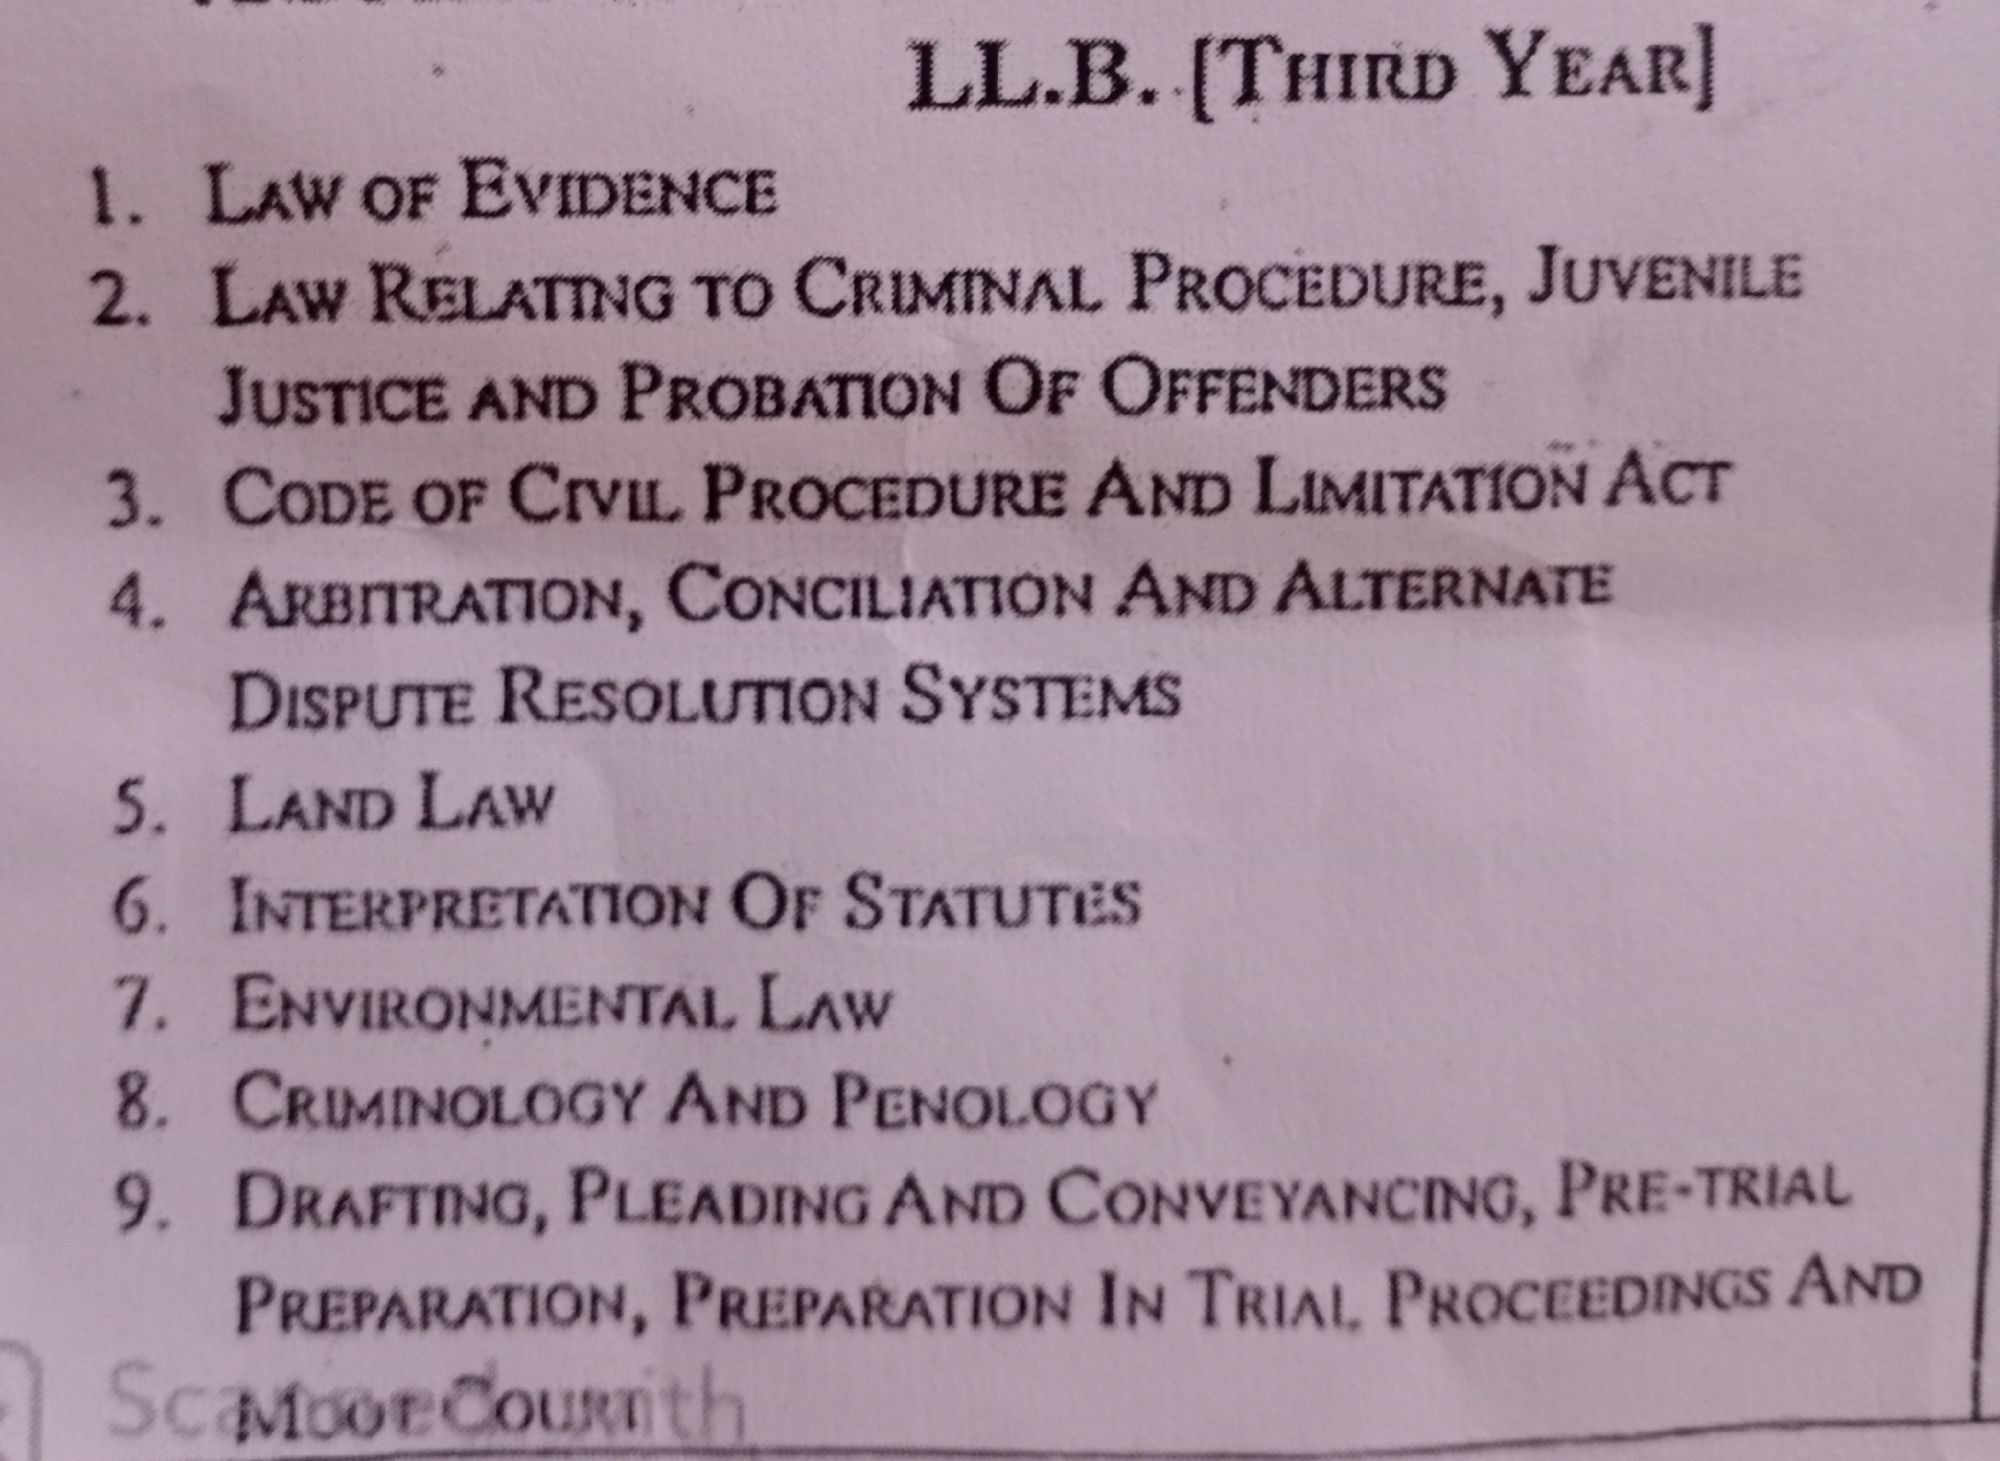 Basanti Lal Babel Law Relating to Criminal Procedure, Juvenile Justice and Probation of Offenders in Hindi Medium